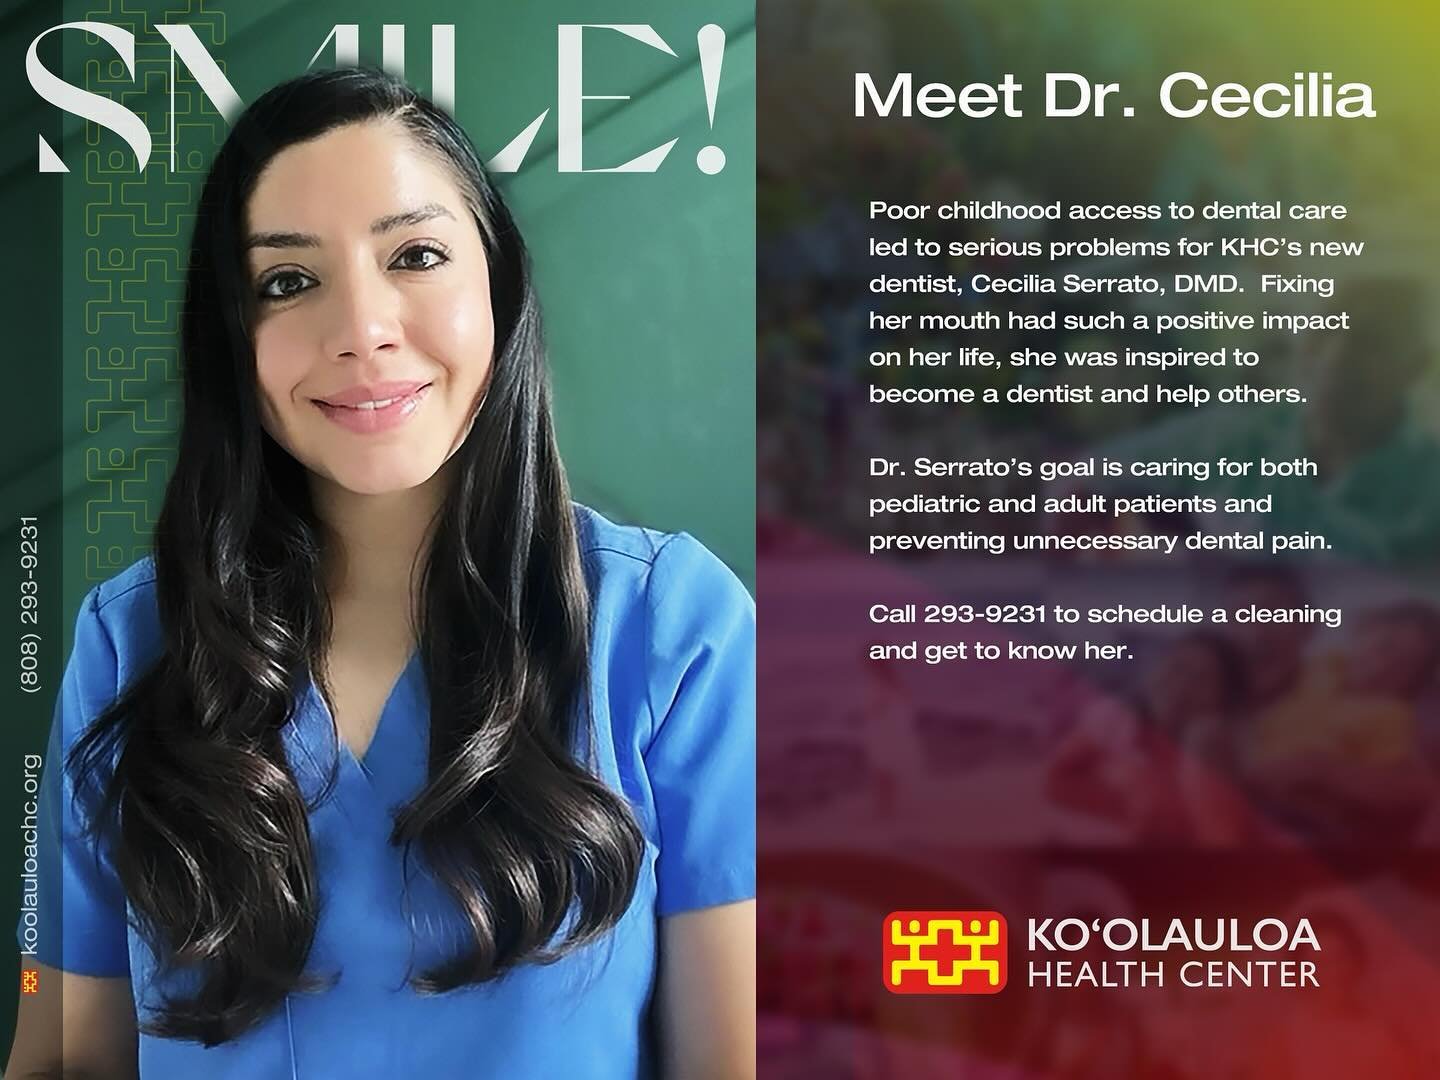 Aloha &lsquo;Ohana!

Meet Dr. Cecilia! Did you know that poor childhood access to dental care led to serious problems for KHC&rsquo;s dentist, Cecilia Serrato, DMD. Fixing her mouth had such a positive impact on her life, that she was inspired to bec